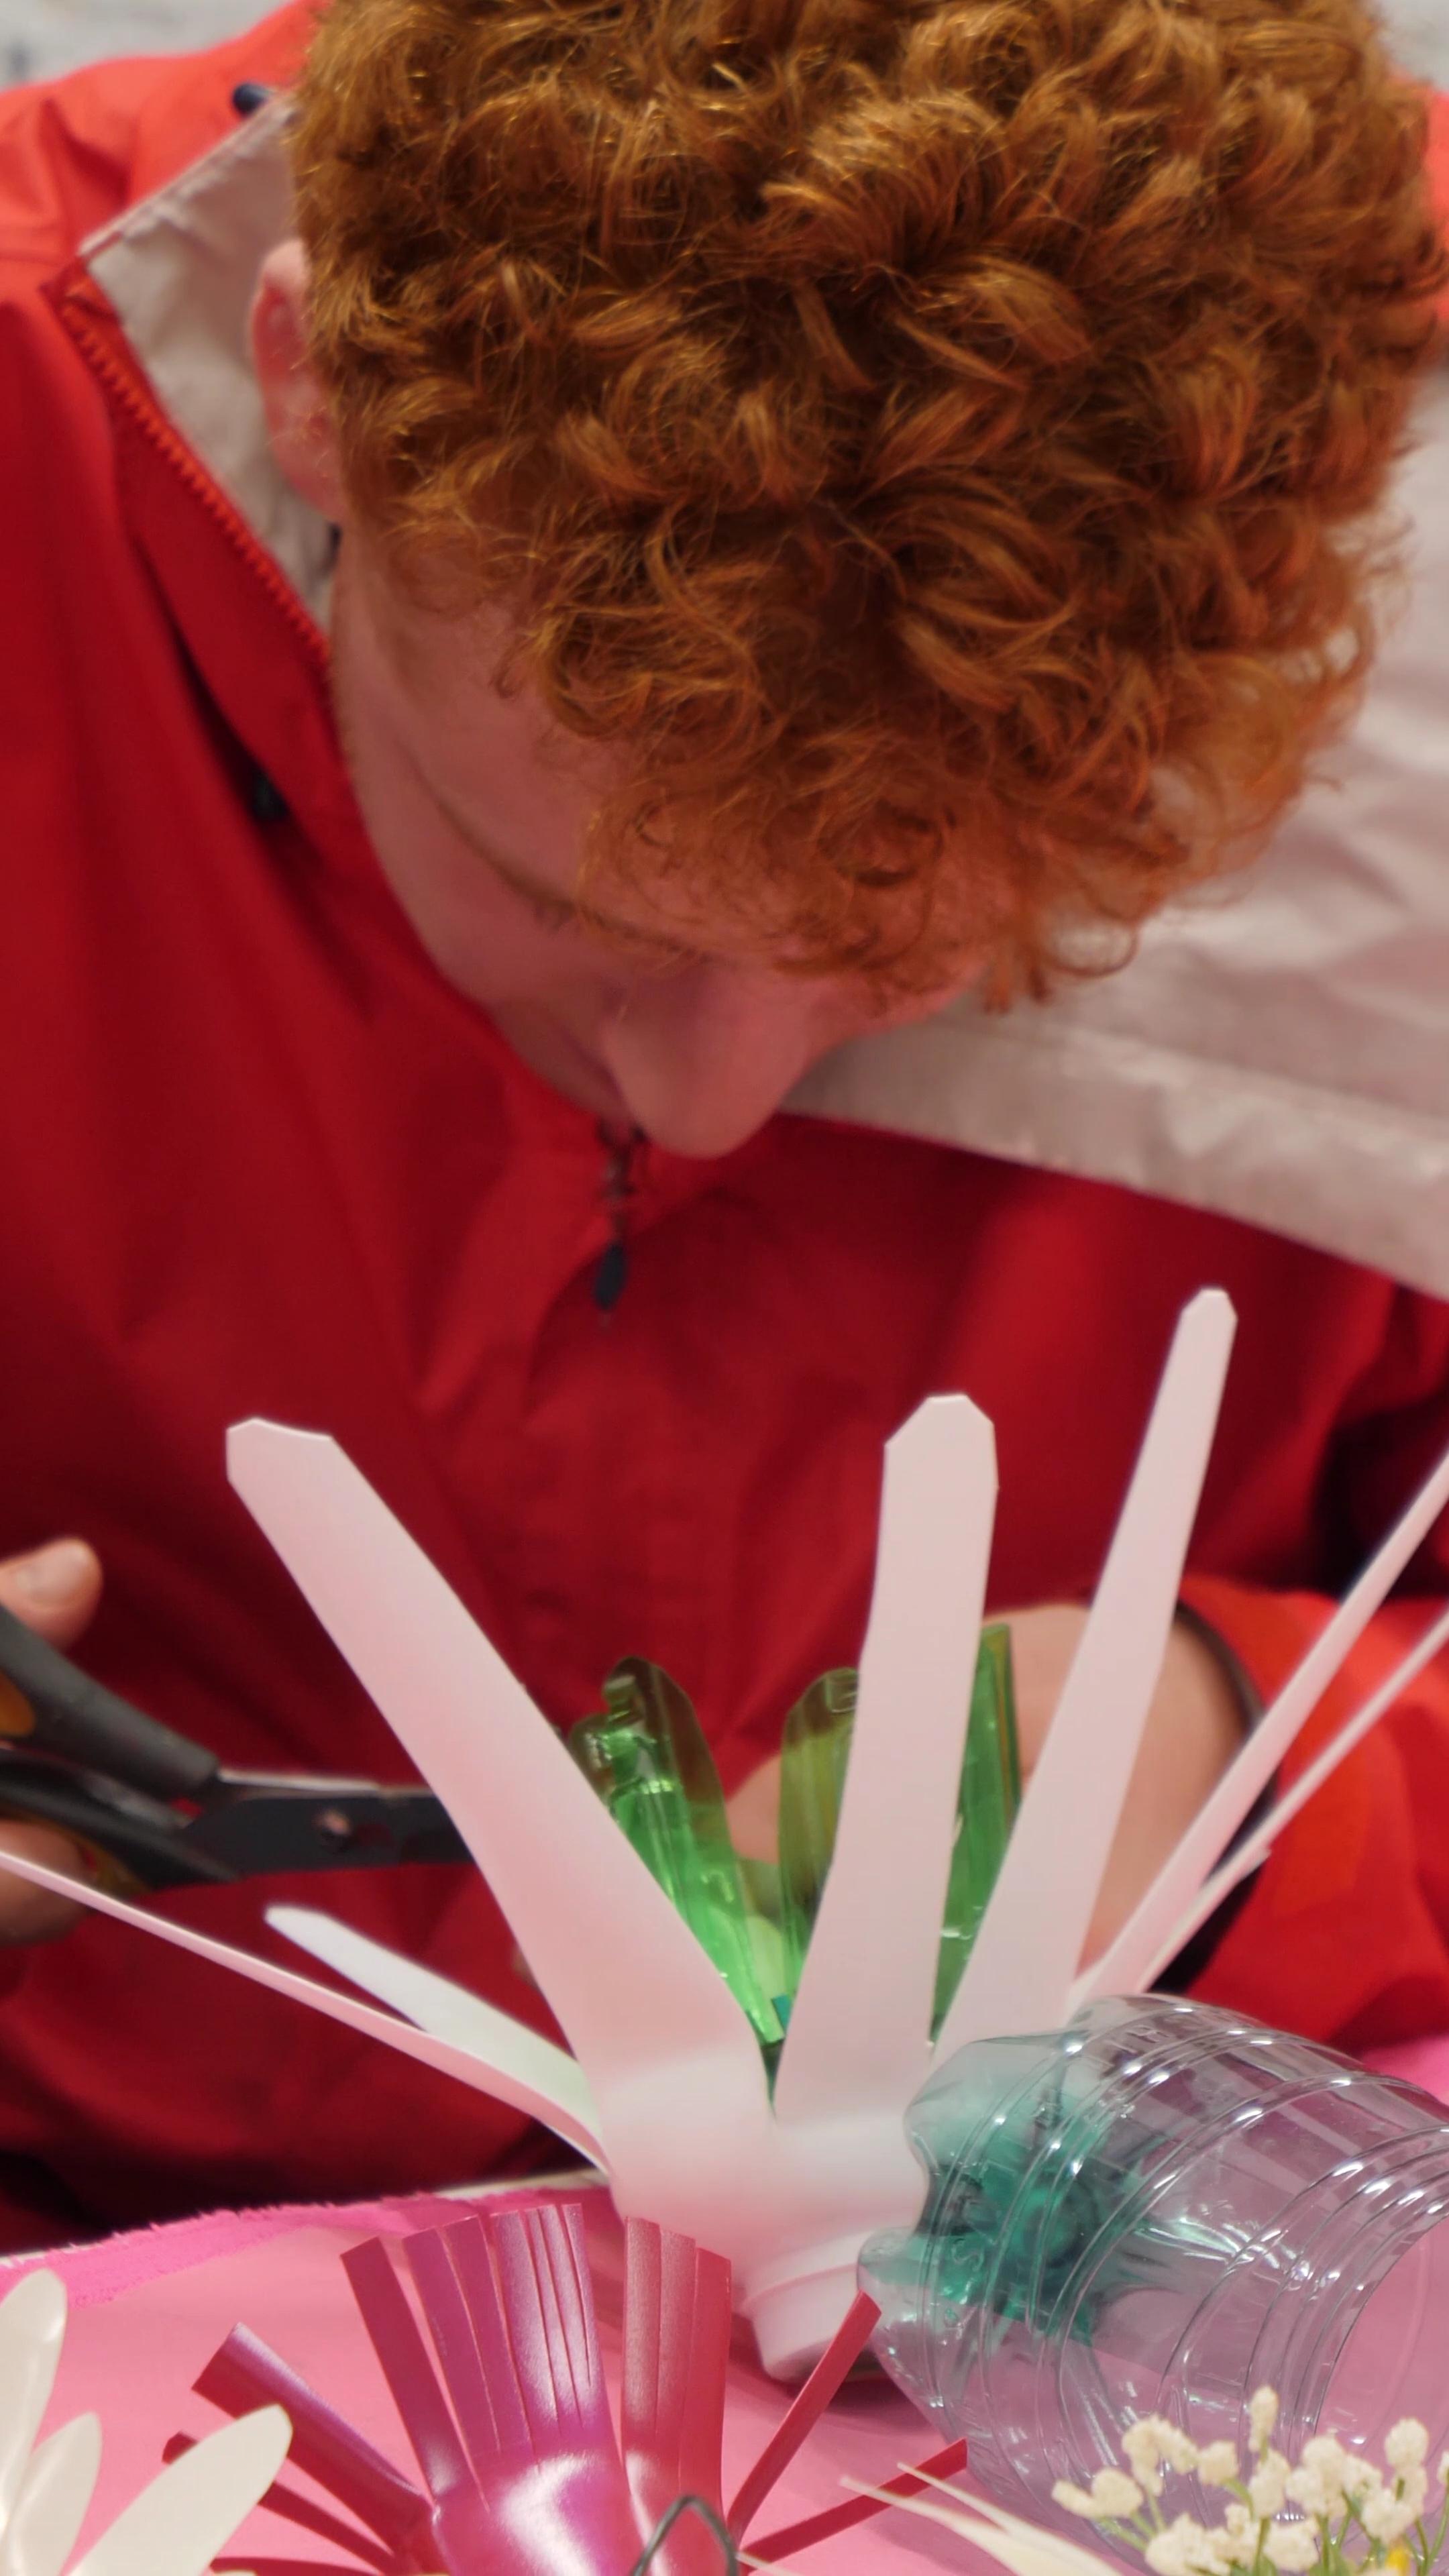 young person creating a flower from recycled plastics